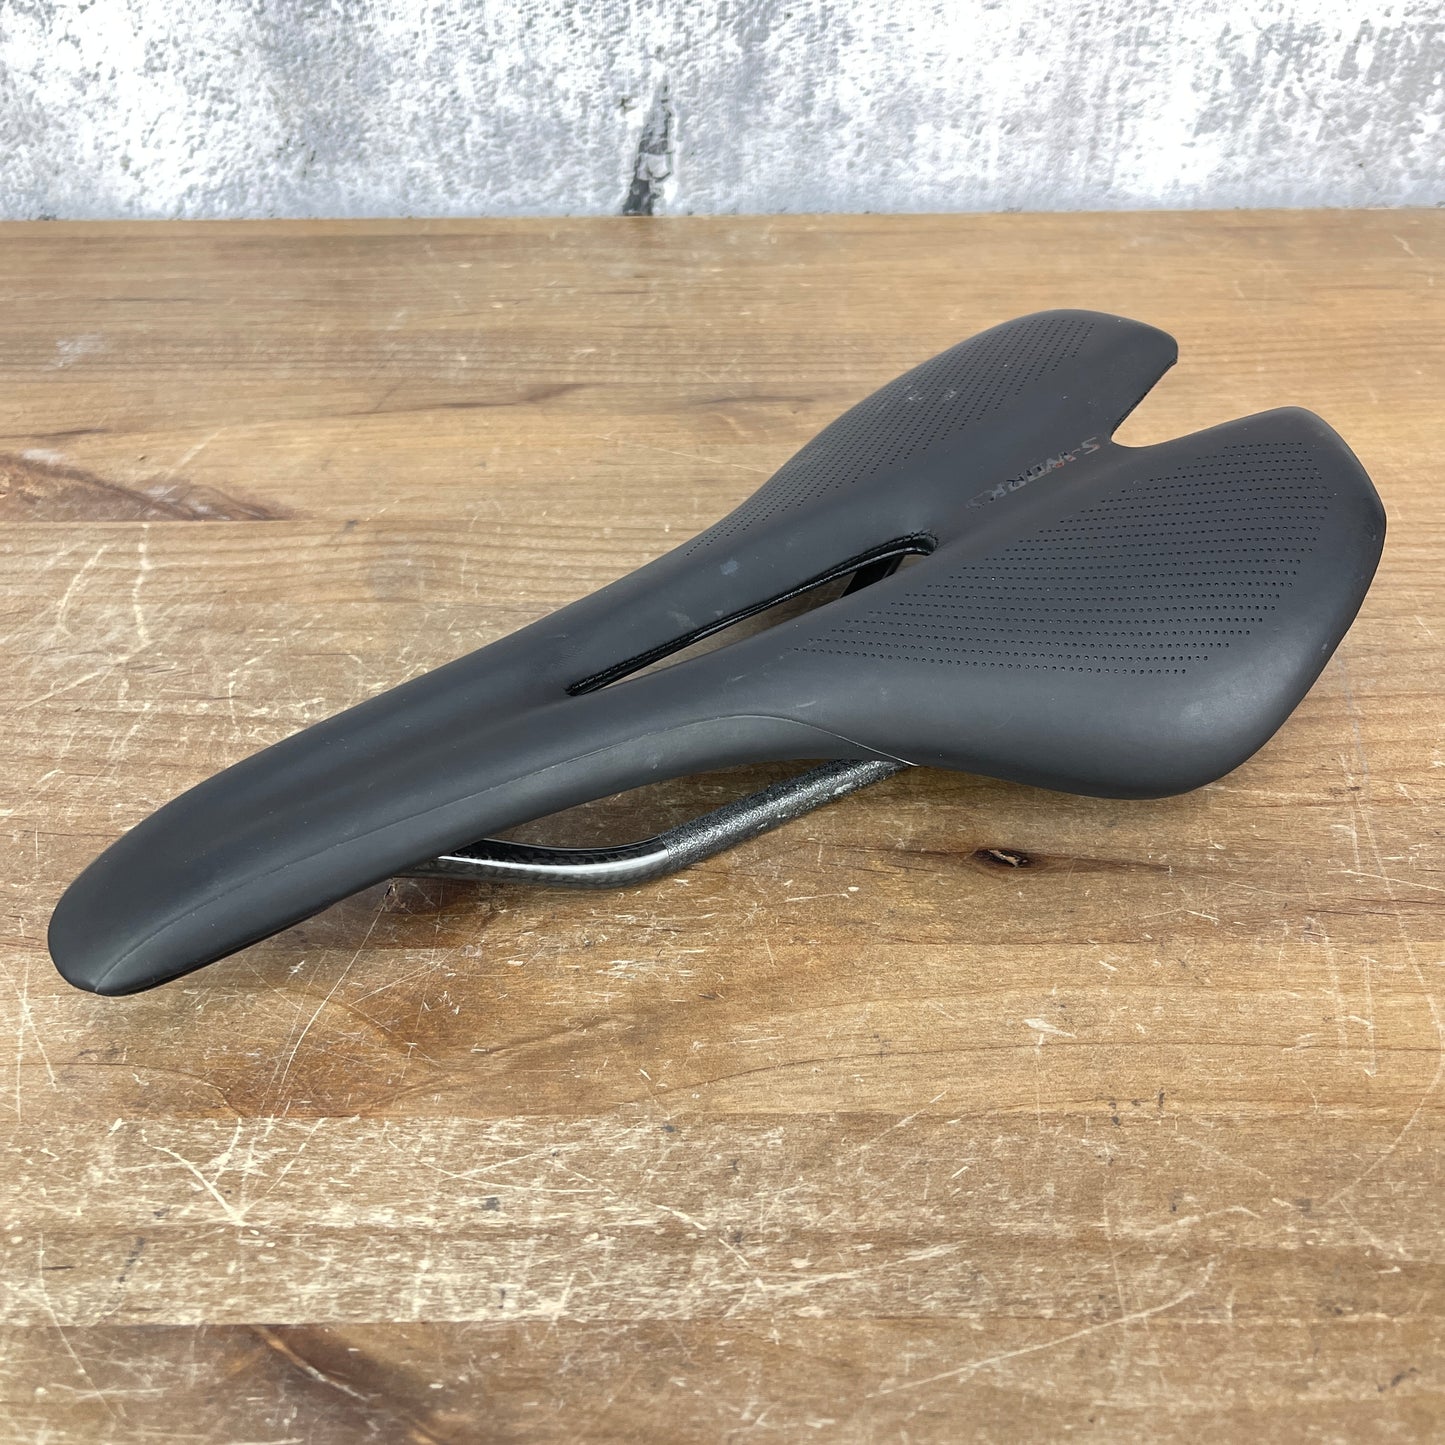 Specialized S-Works Toupe 143mm Carbon Rail Road Bike Saddle 150g